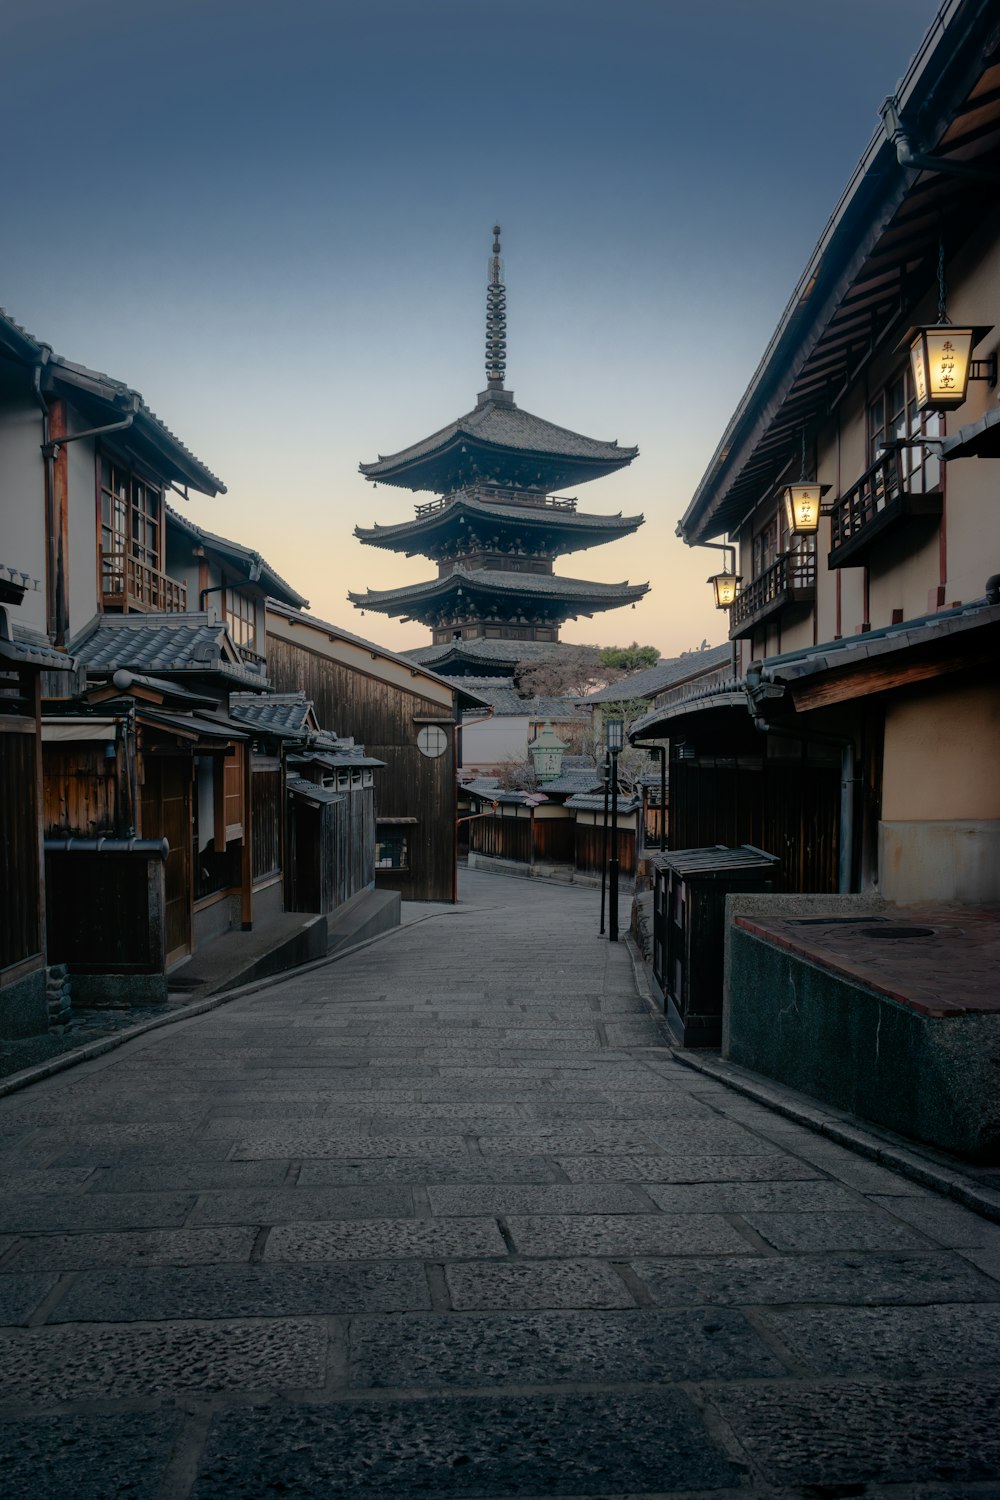 an empty street with a pagoda in the background